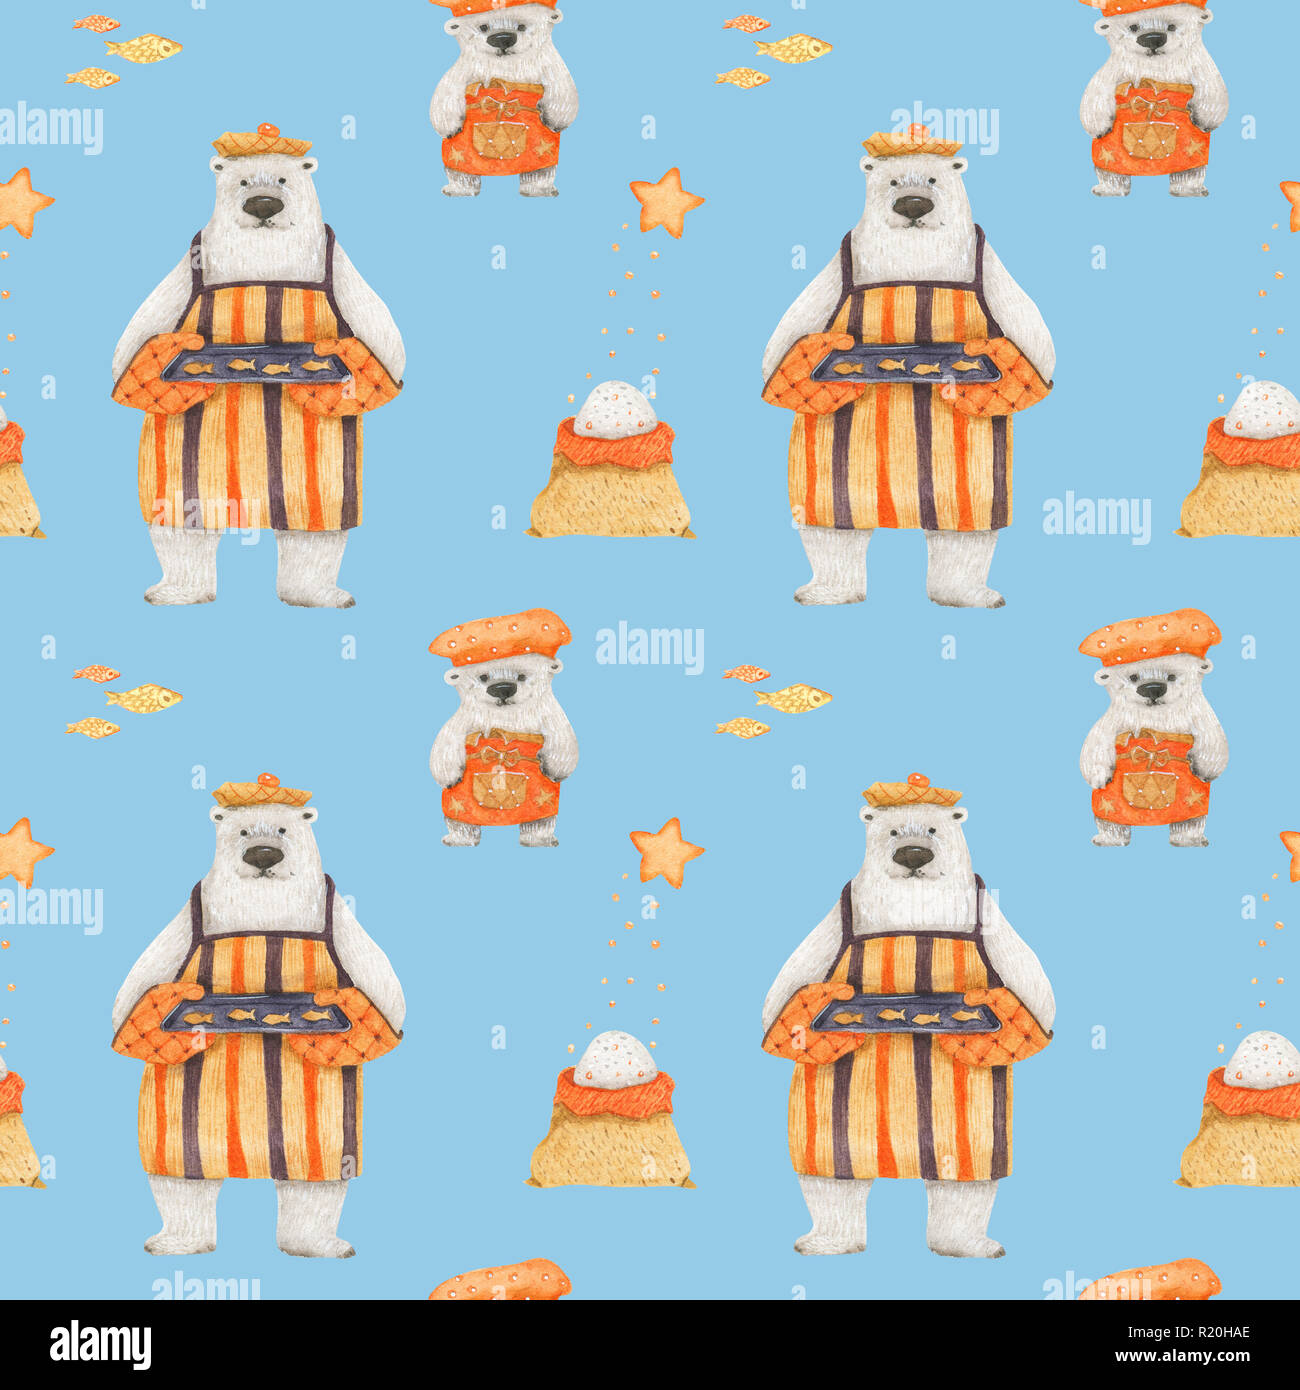 Polar bears baking cookies. Watercolor seamless patterns for textile, wrapping paper and any tiled design. Blue background, clipping path uncluded Stock Photo